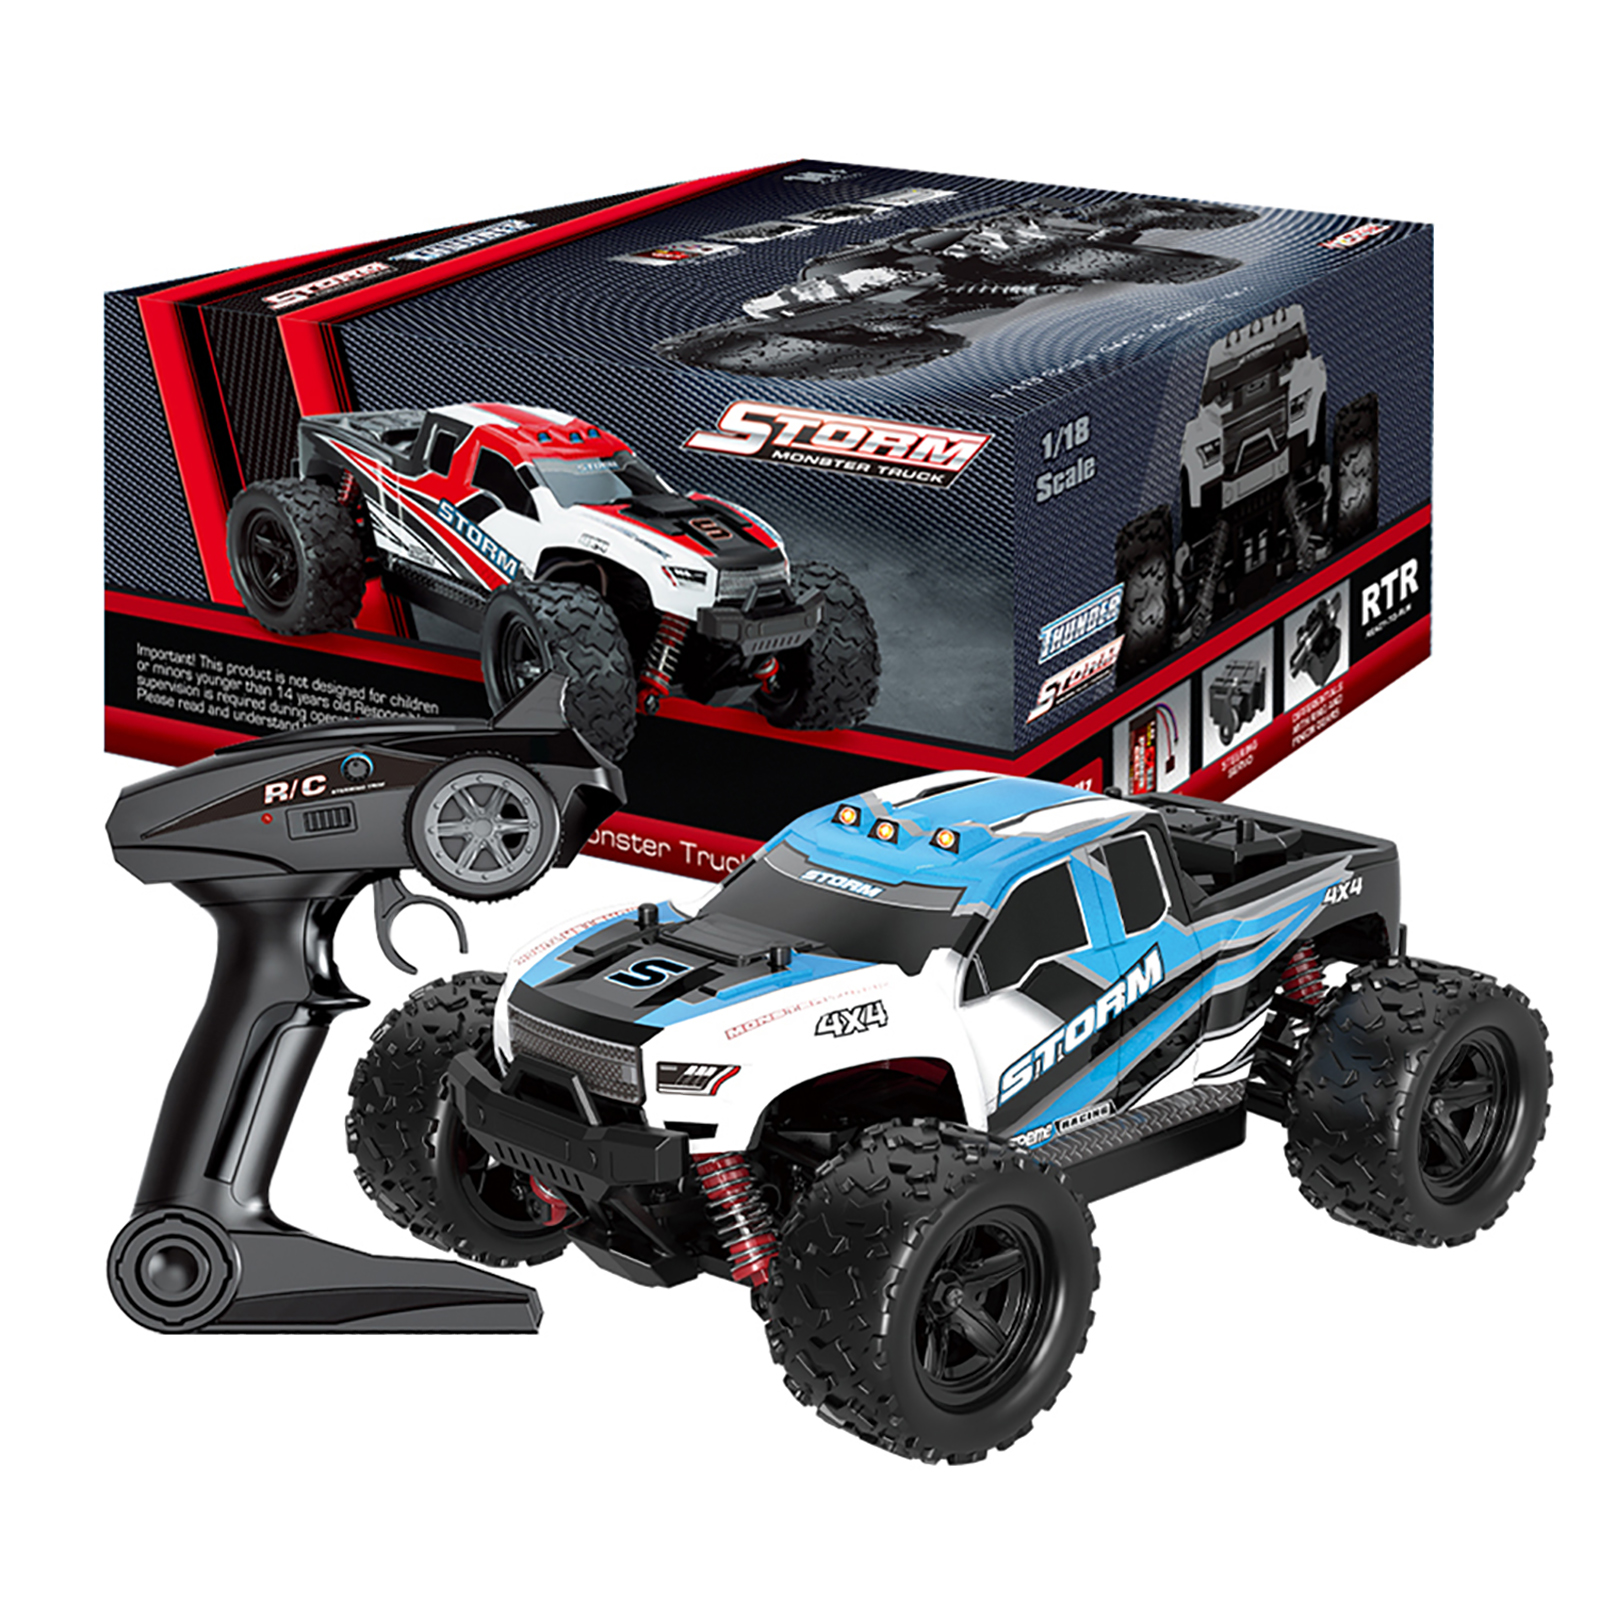 18301/18302 1/18 Full Scale Remote Control Car 2.4GHz Racing Car High-speed 45Km/h Off-road Vehicle Toys 18302 blue